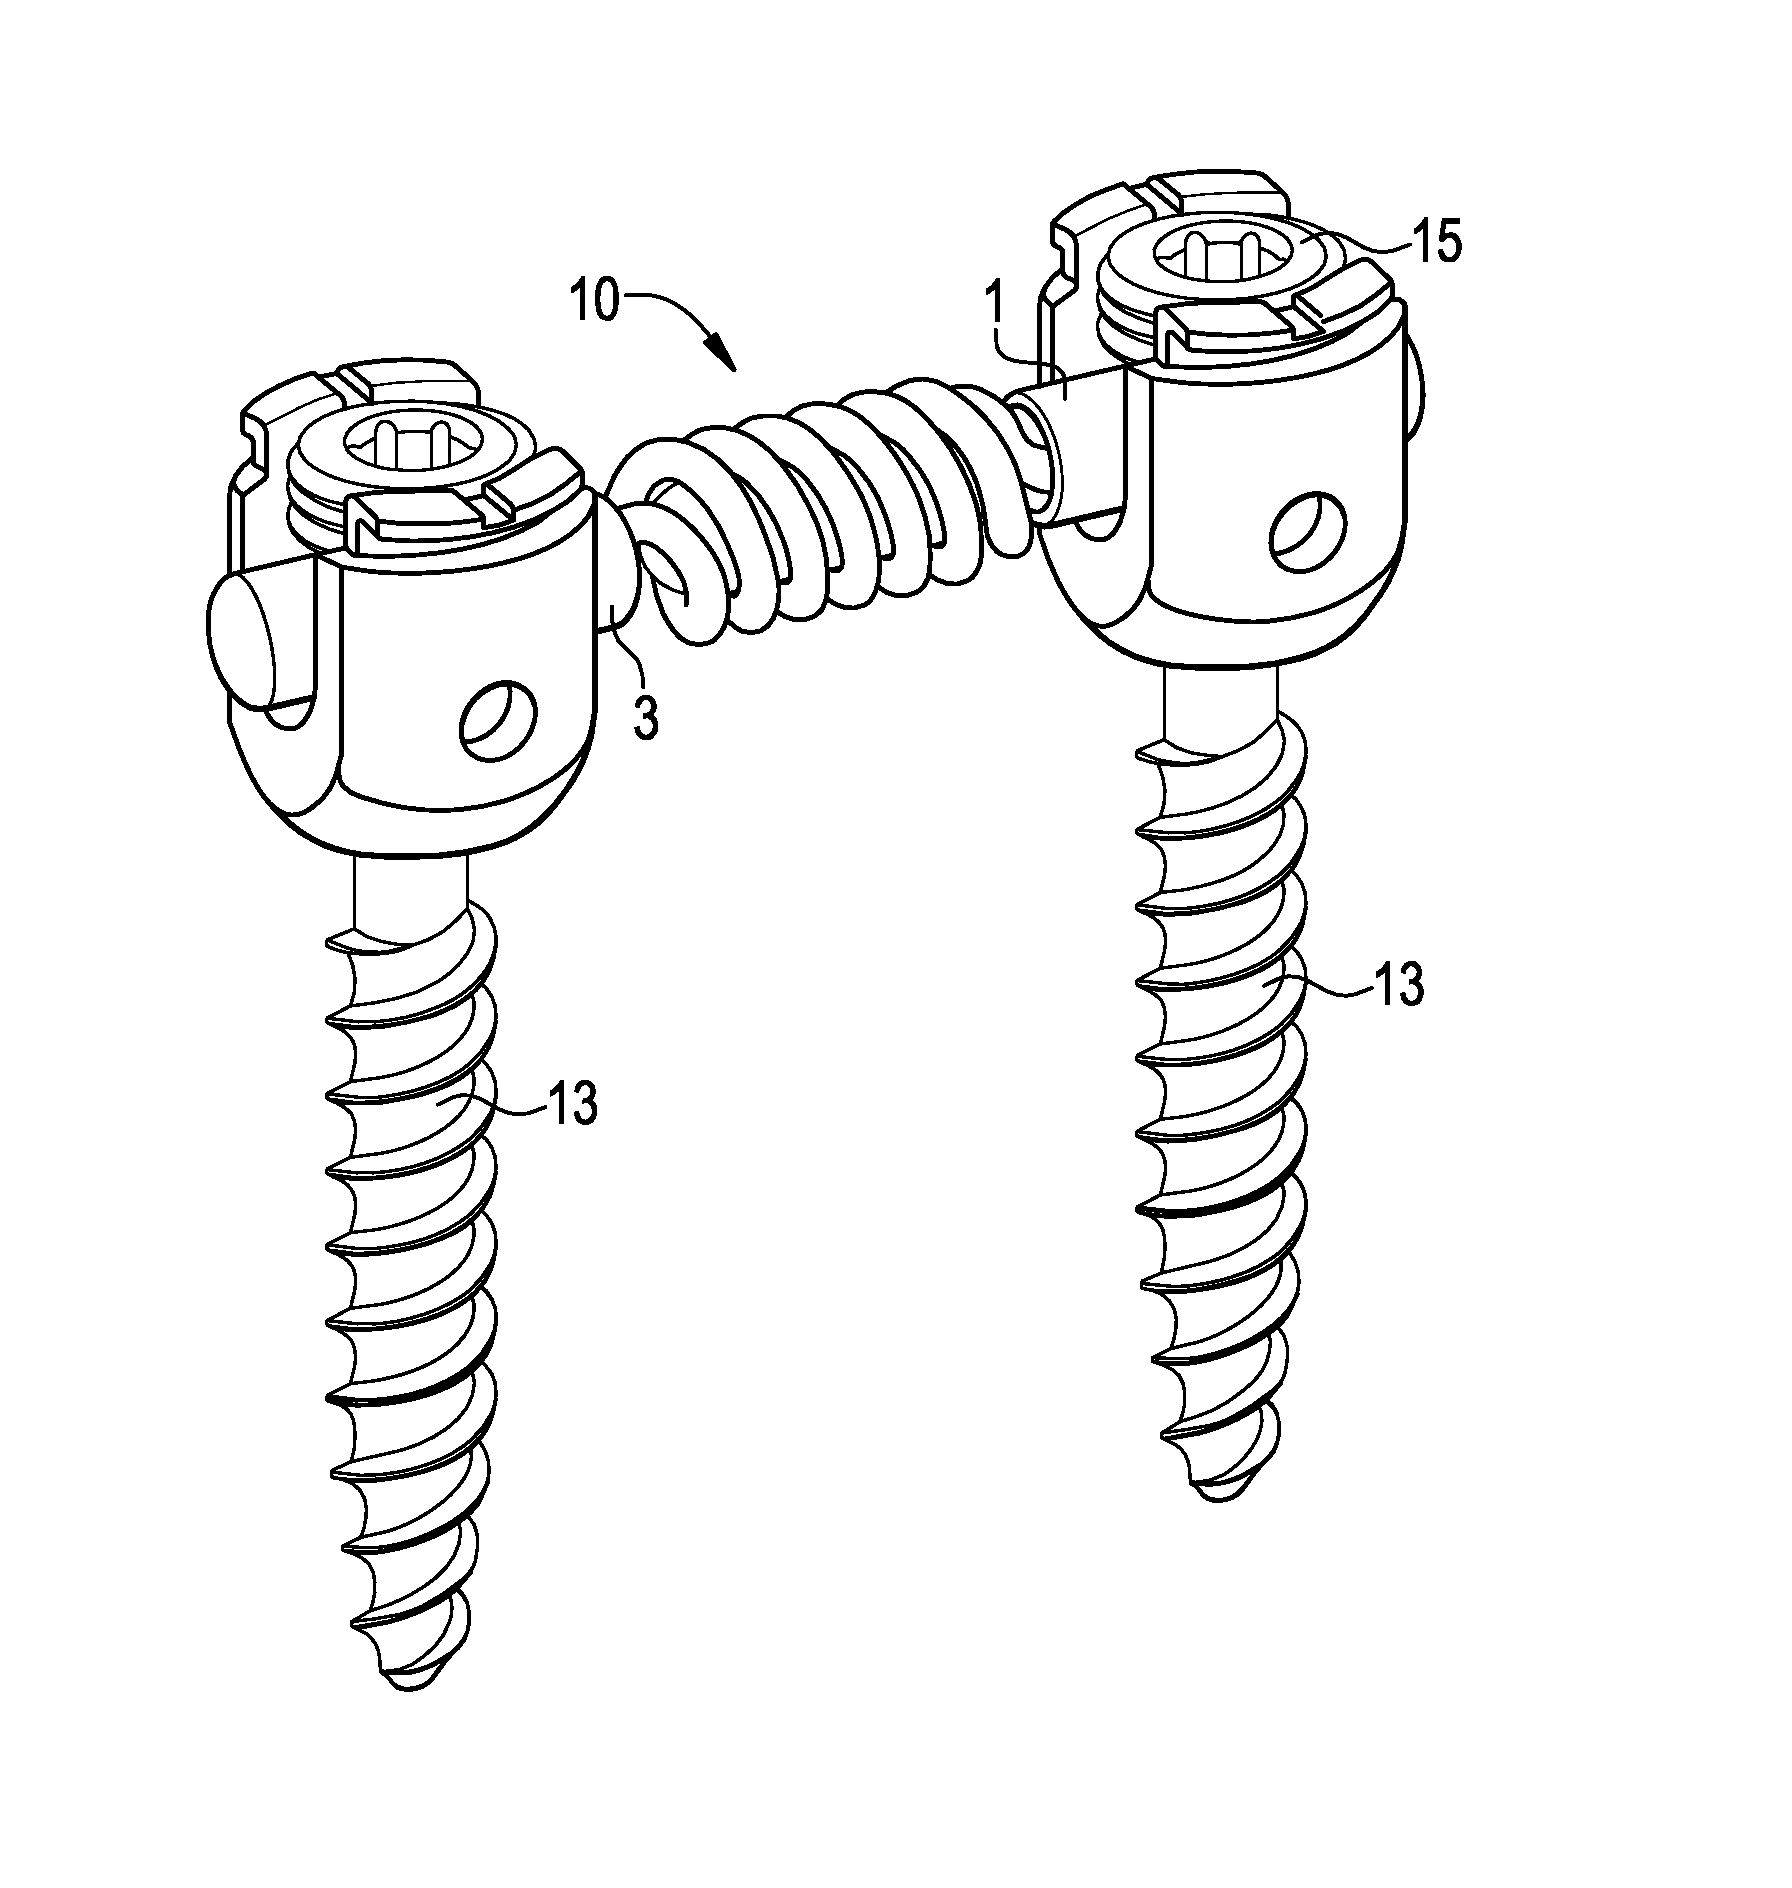 Dual spring posterior dynamic stabilization device with elongation limiting elastomers